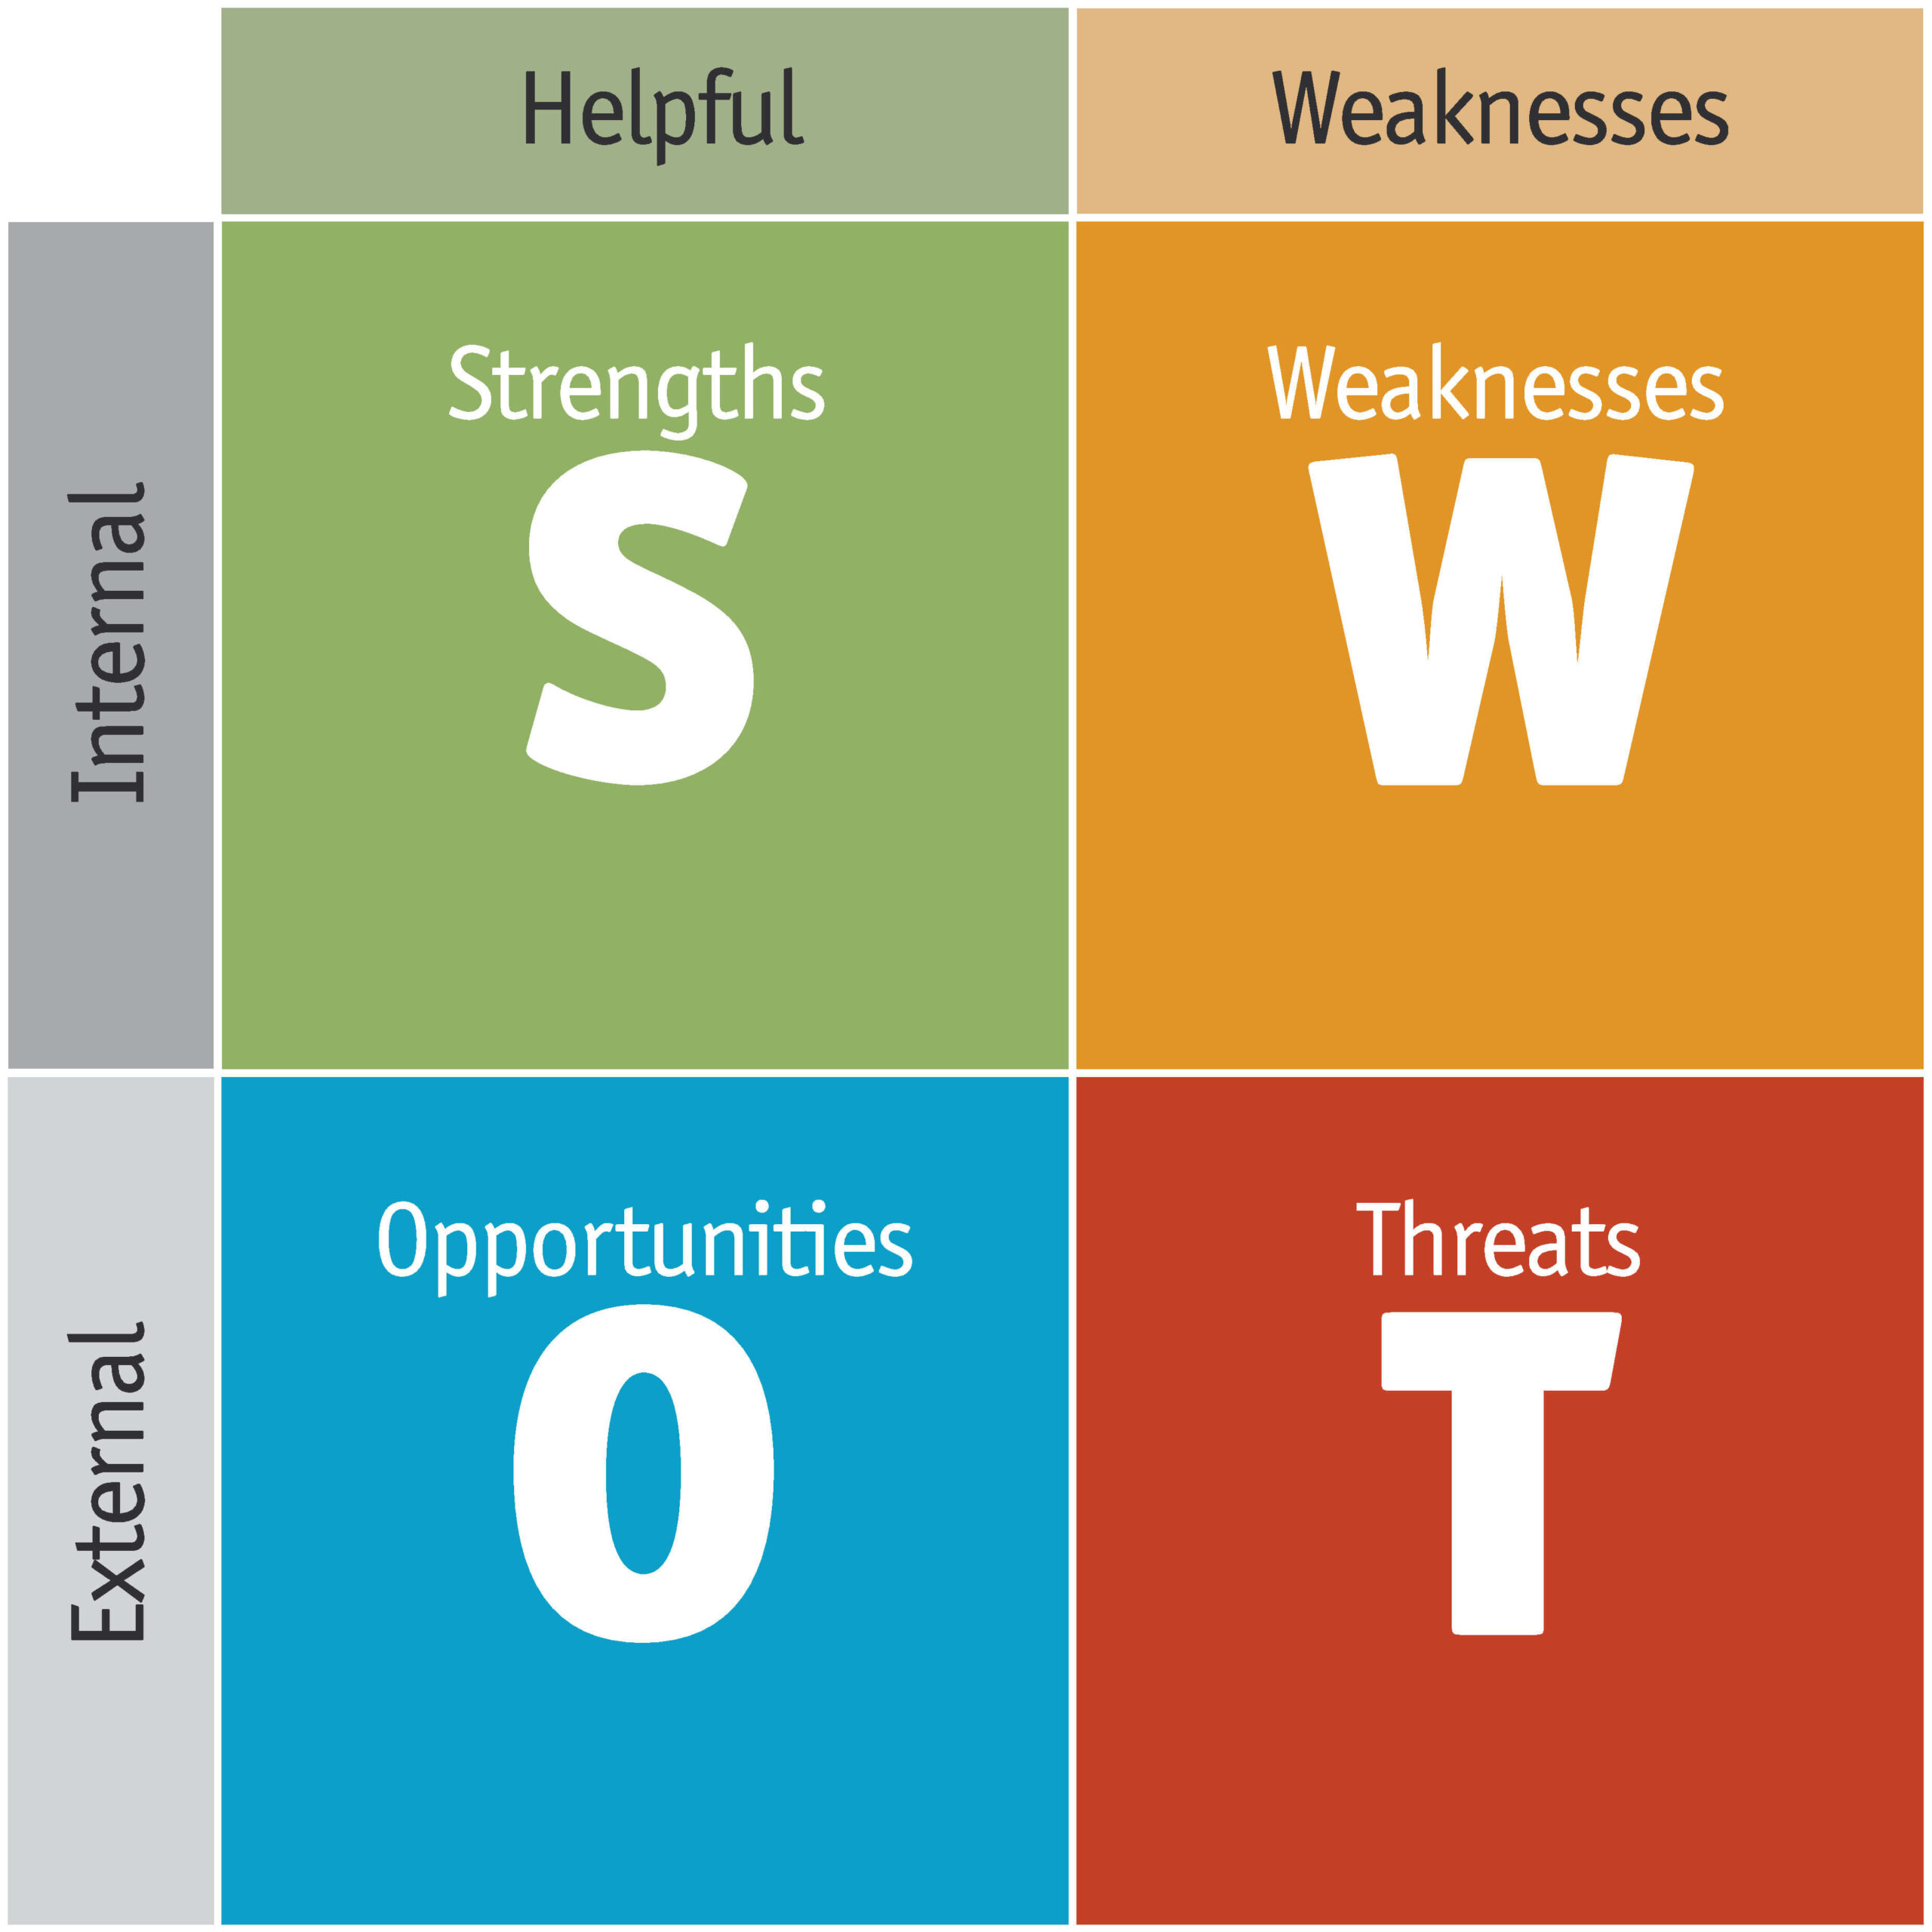 swot analysis in conjunction with the business plan